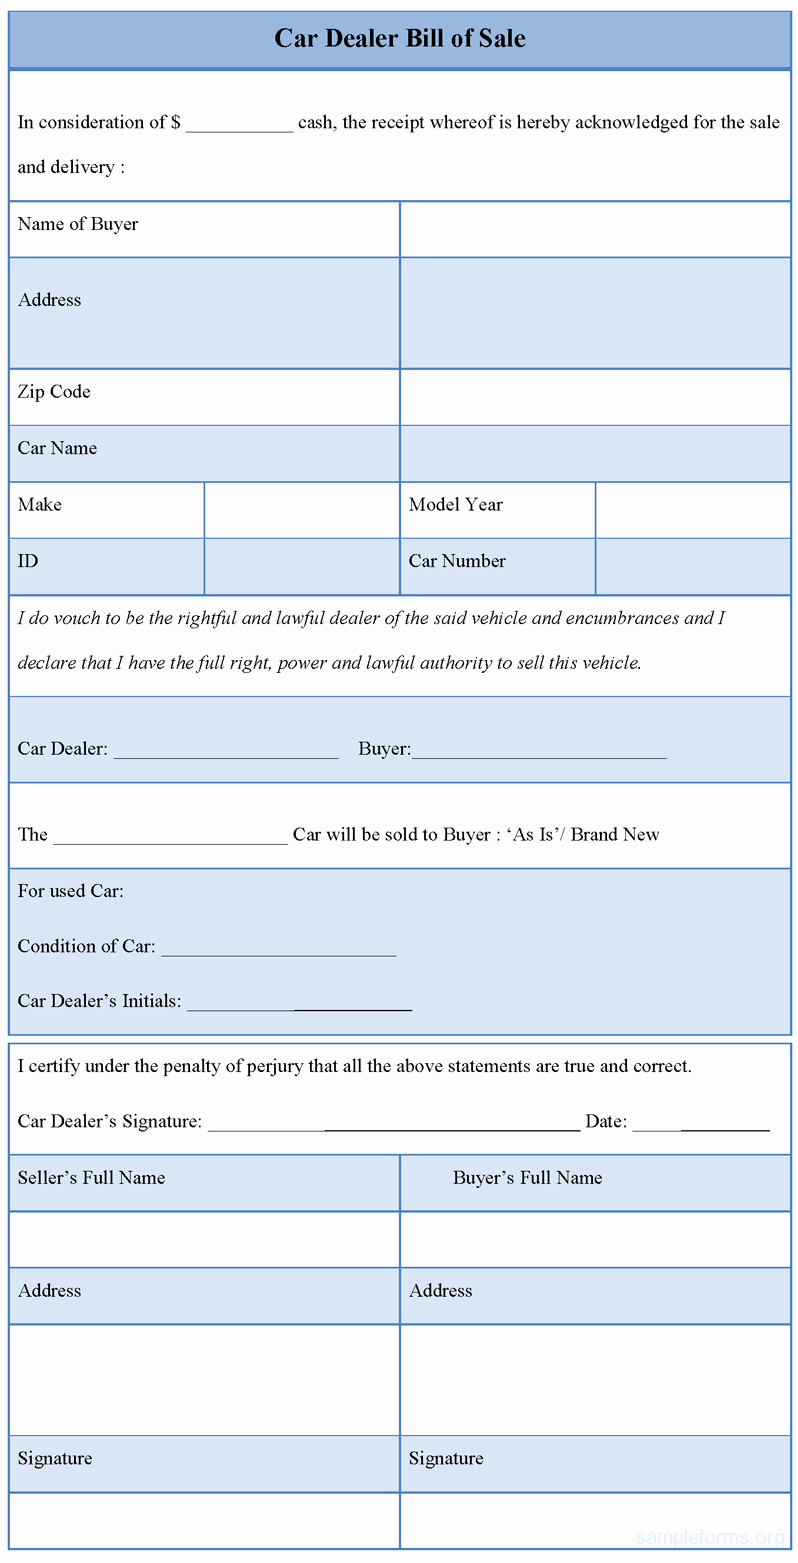 Truck Bill Of Sale form Awesome Car Dealer Bill Of Sale form Sample forms